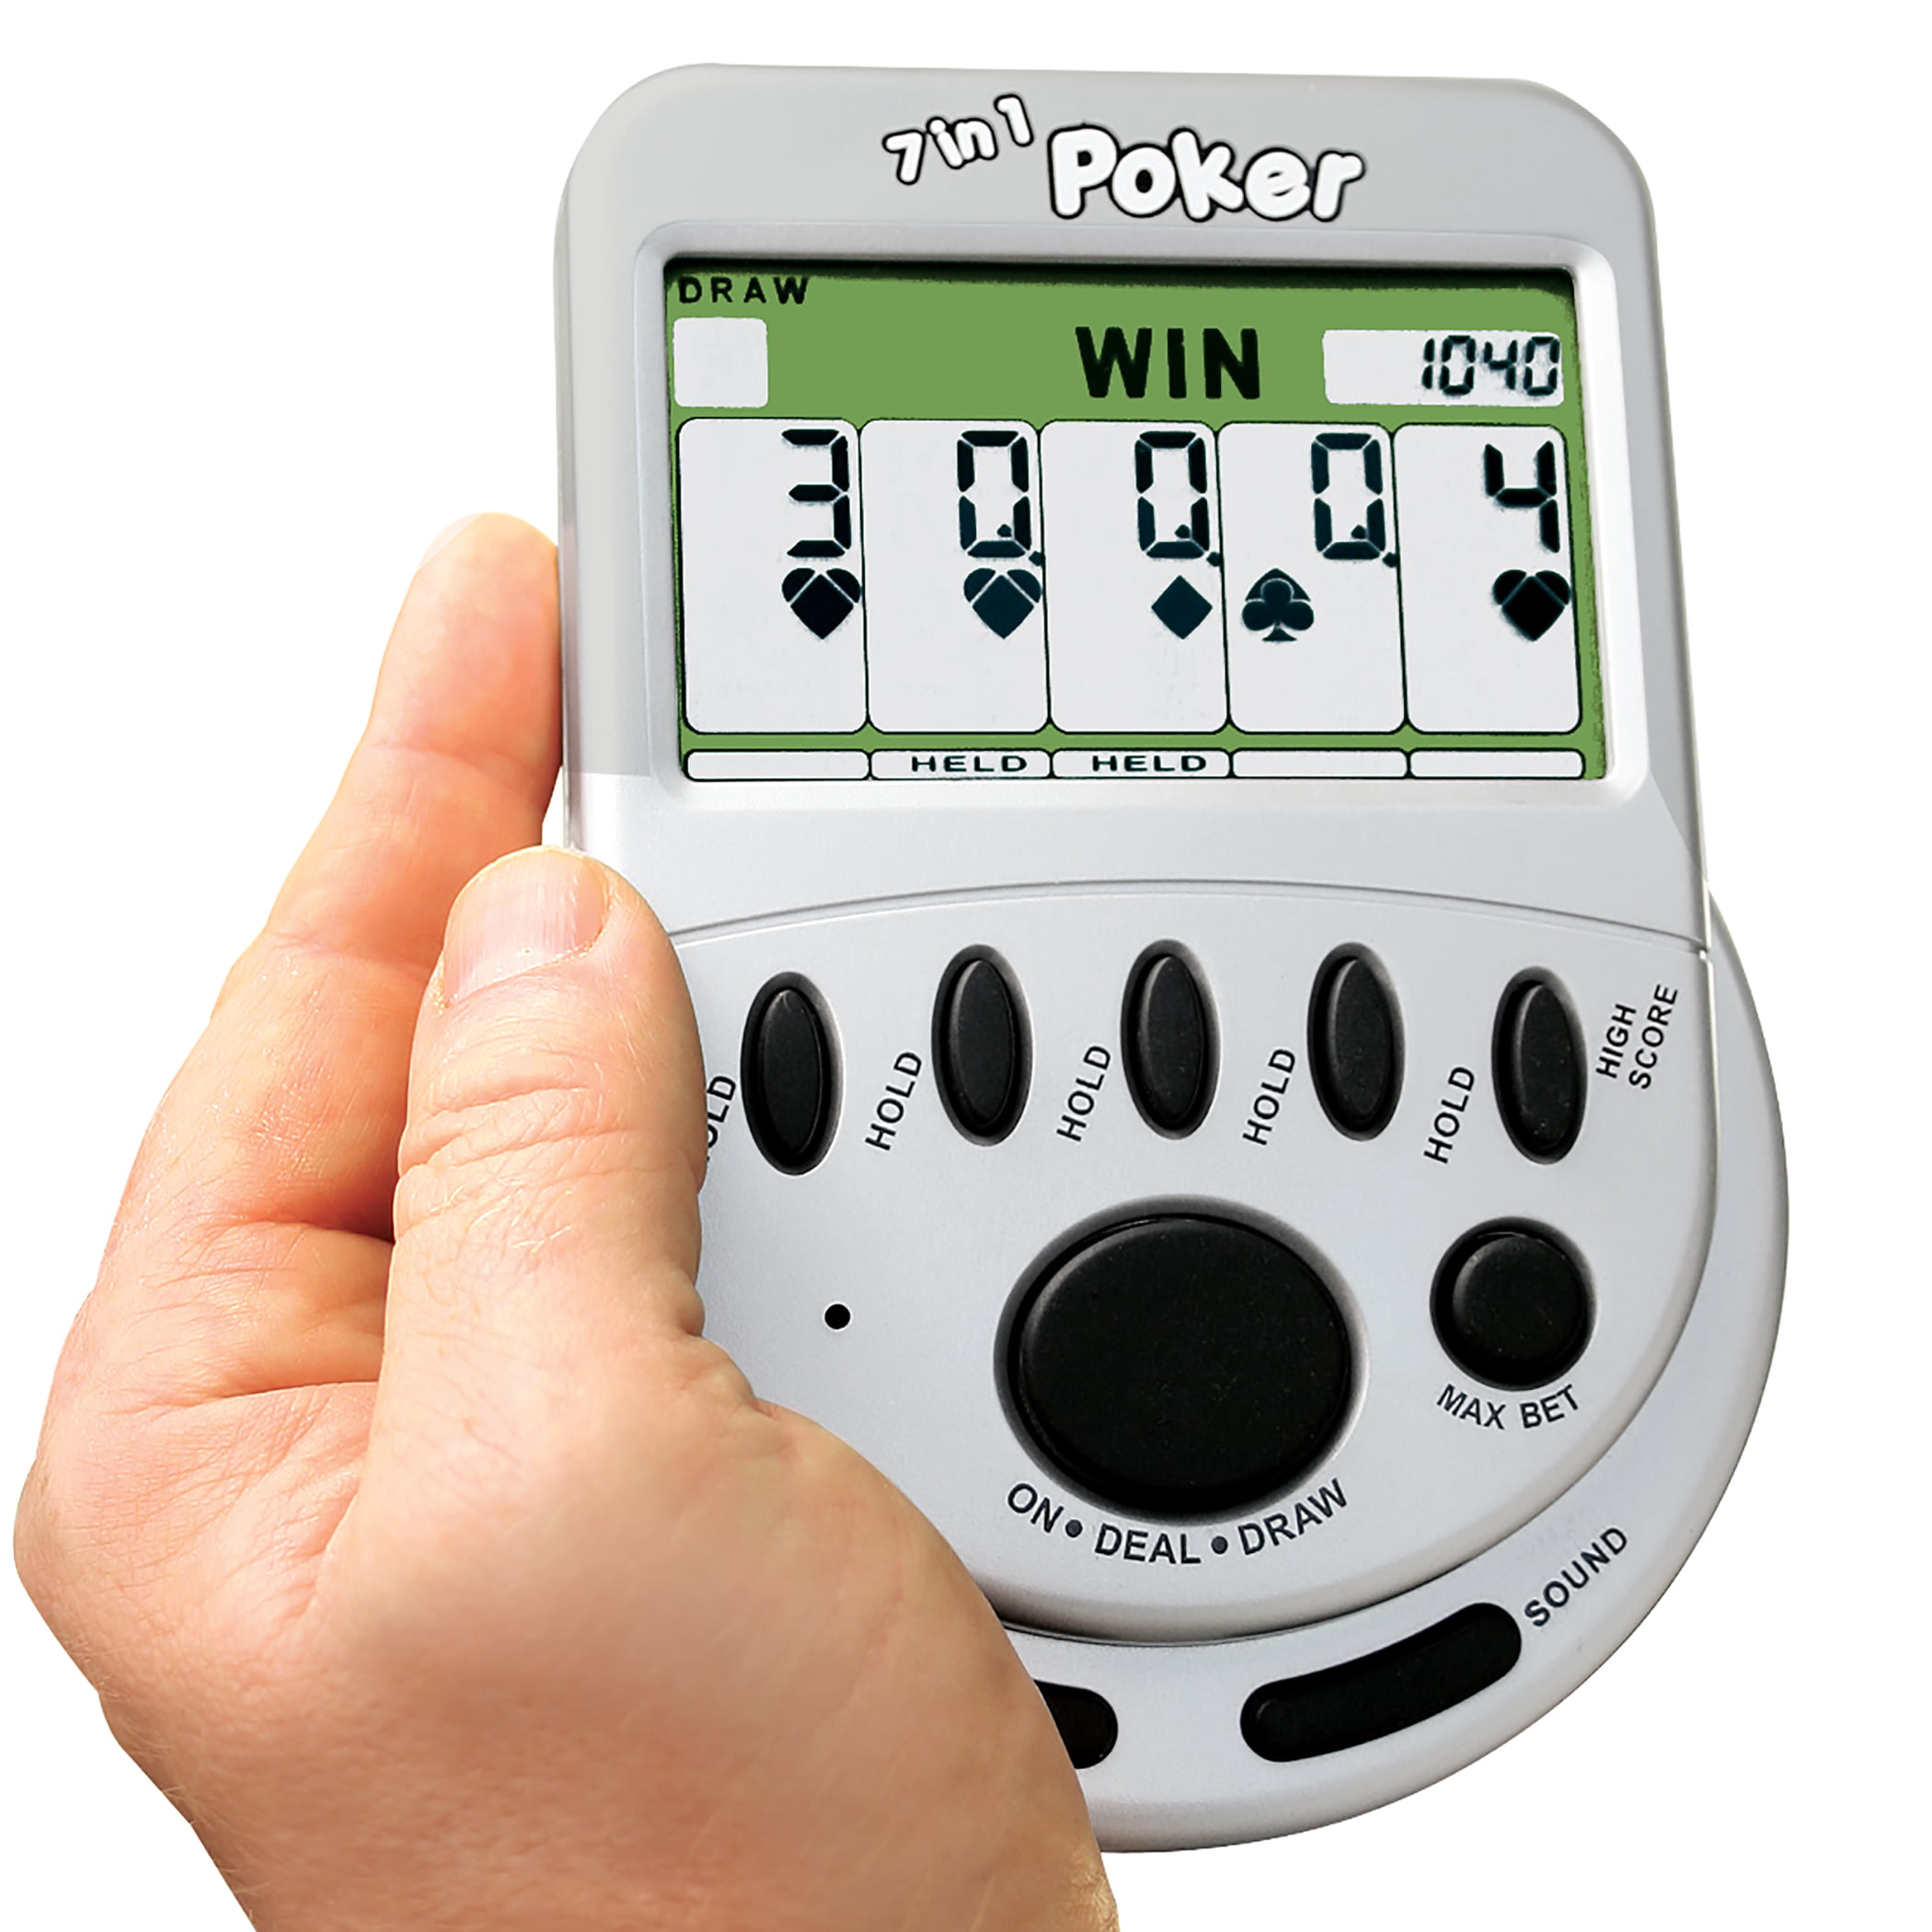 301288W MGA Entertainment Texas Holdem Poker Showdown Electronic Hand Held Game 035051301288 for sale online 